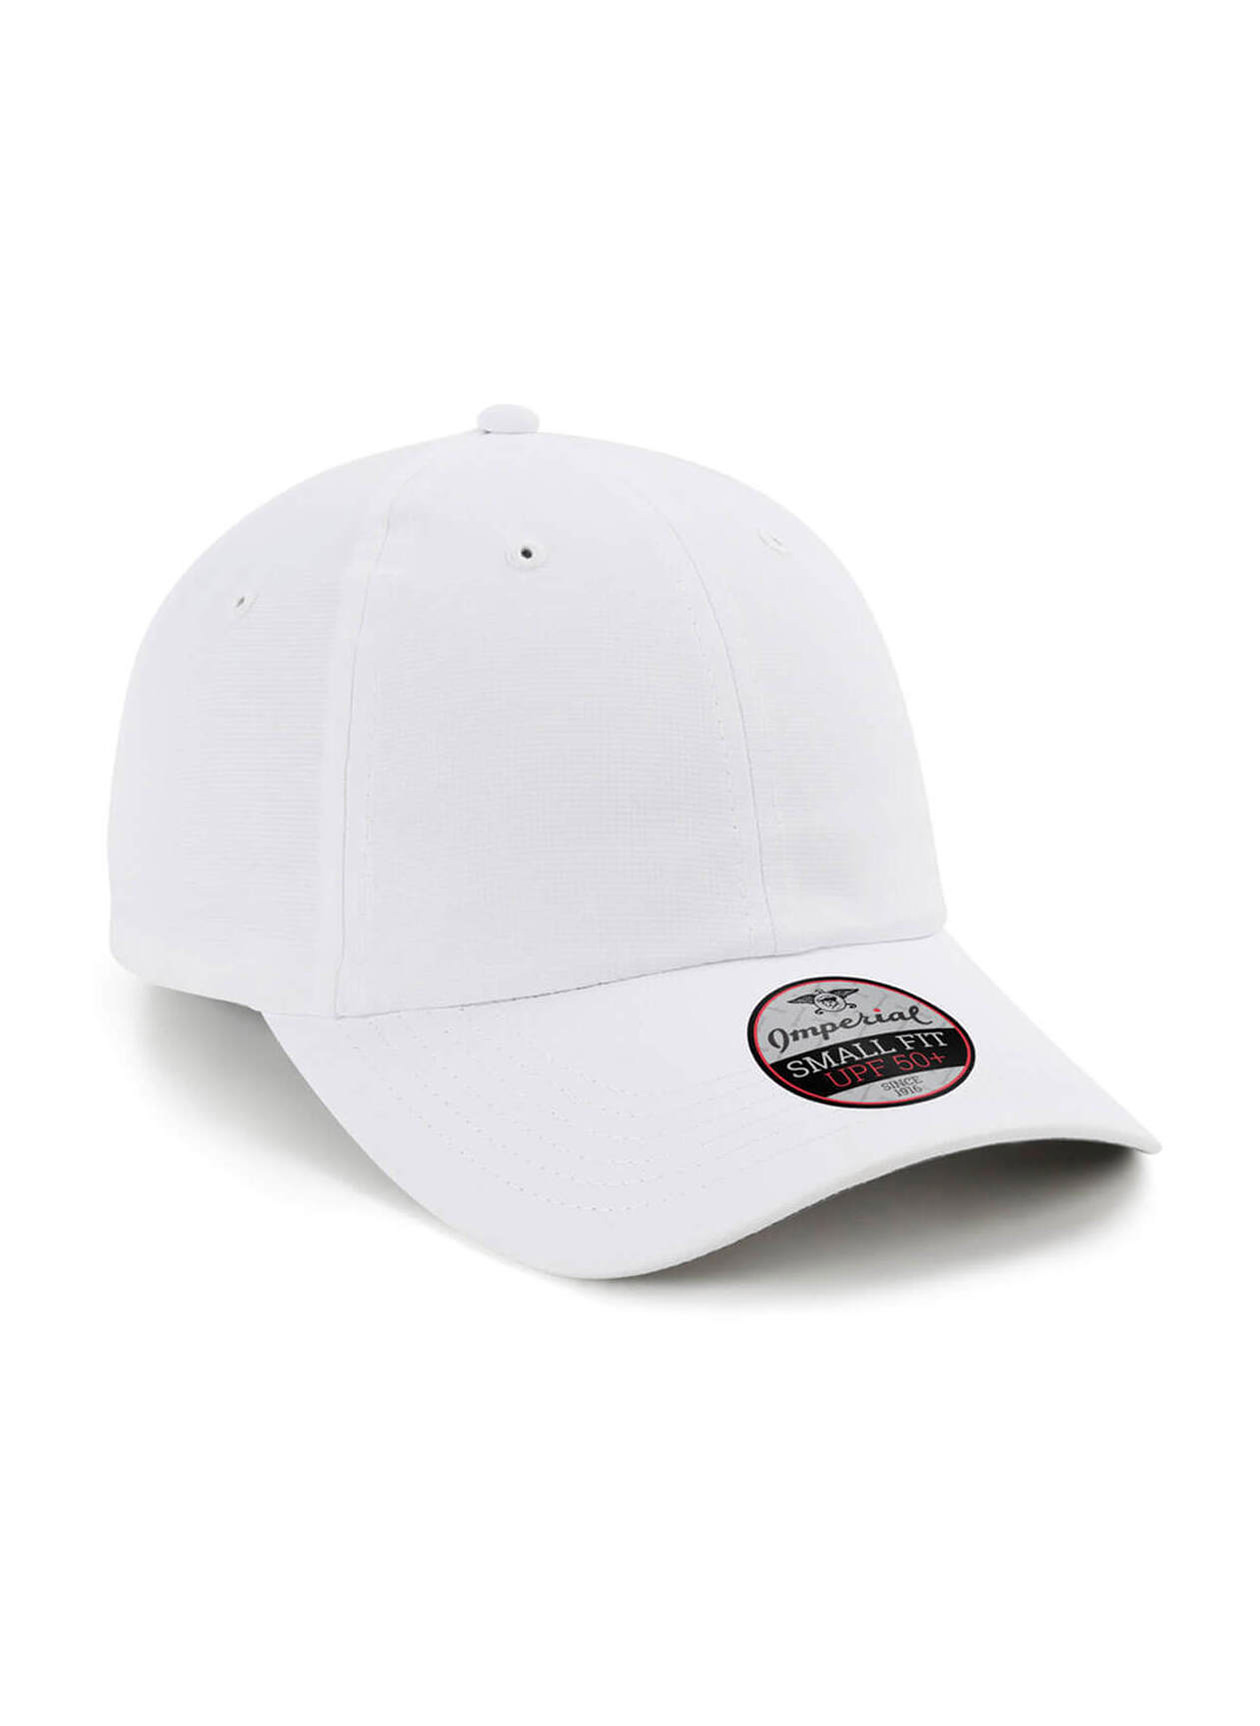 Imperial White Original Small Fit Performance Hat